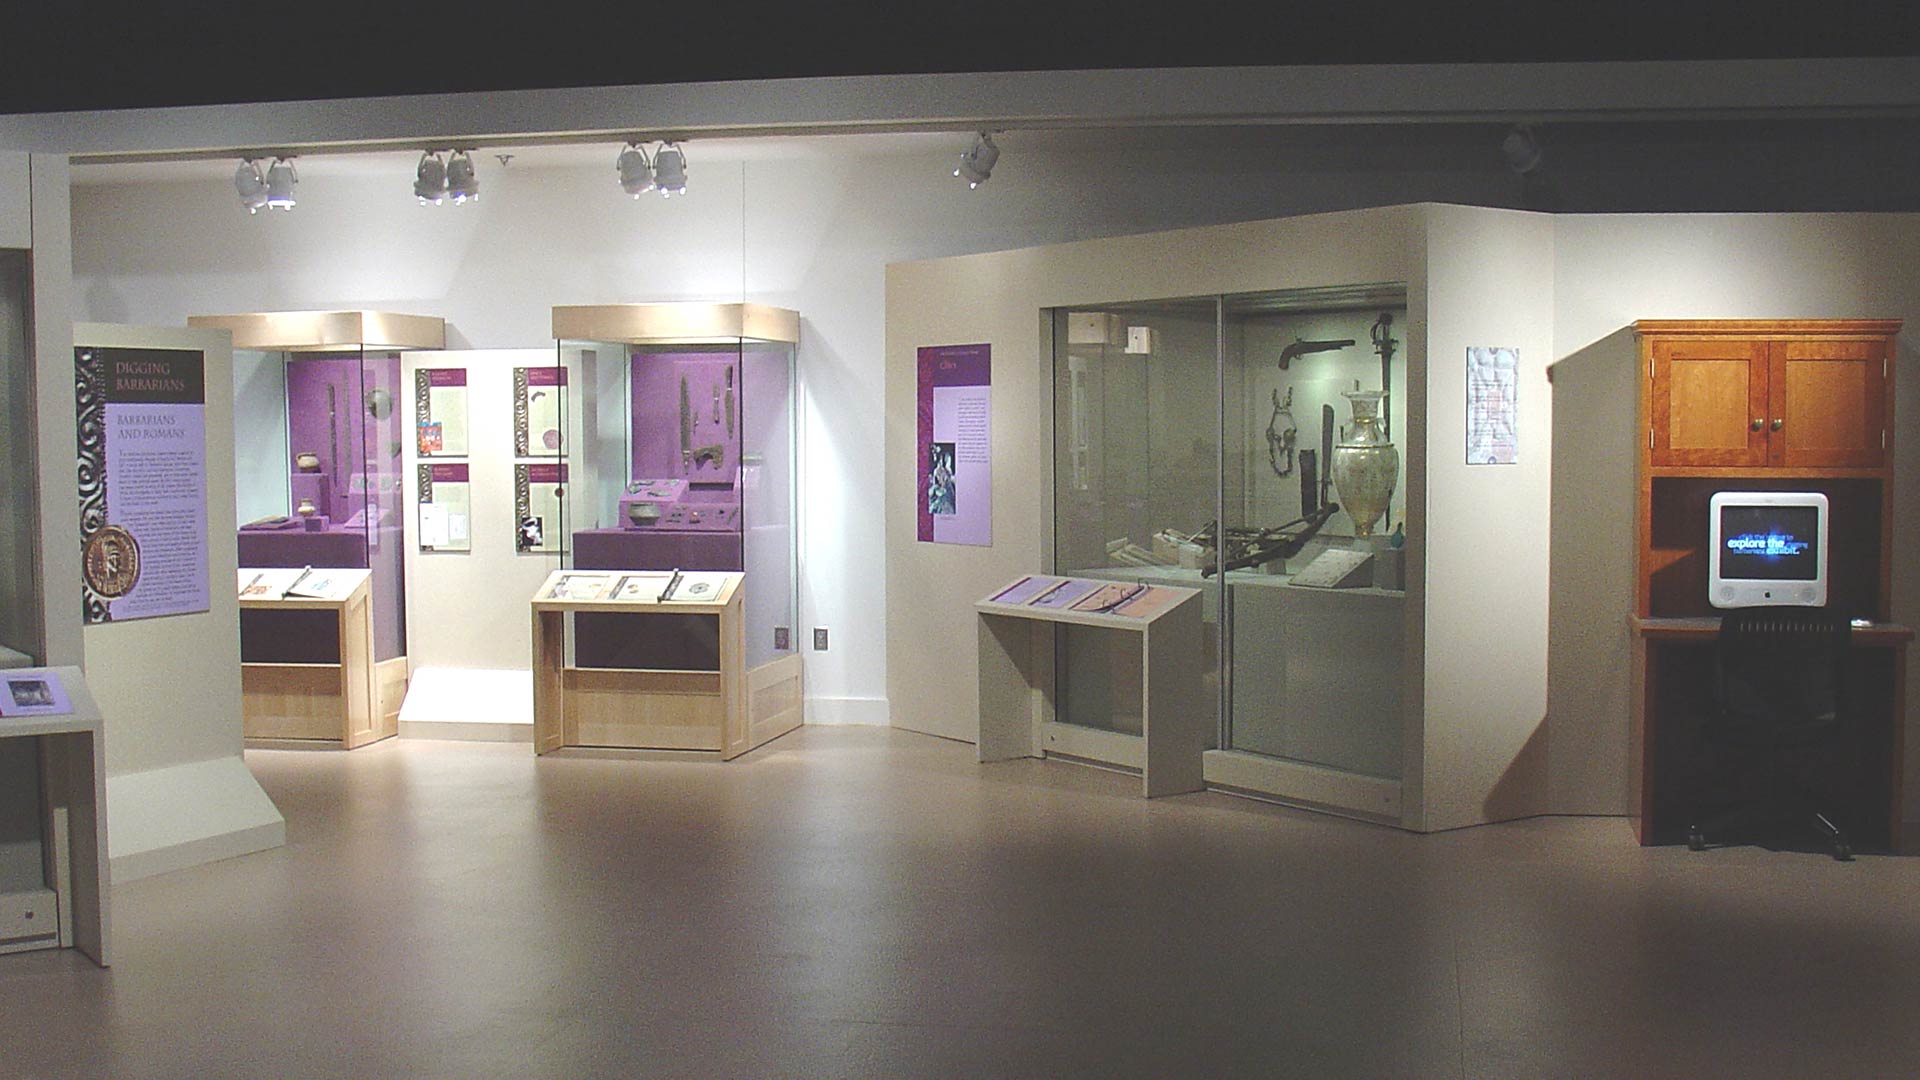 gallery overview, computers, and display cases with various artifacts